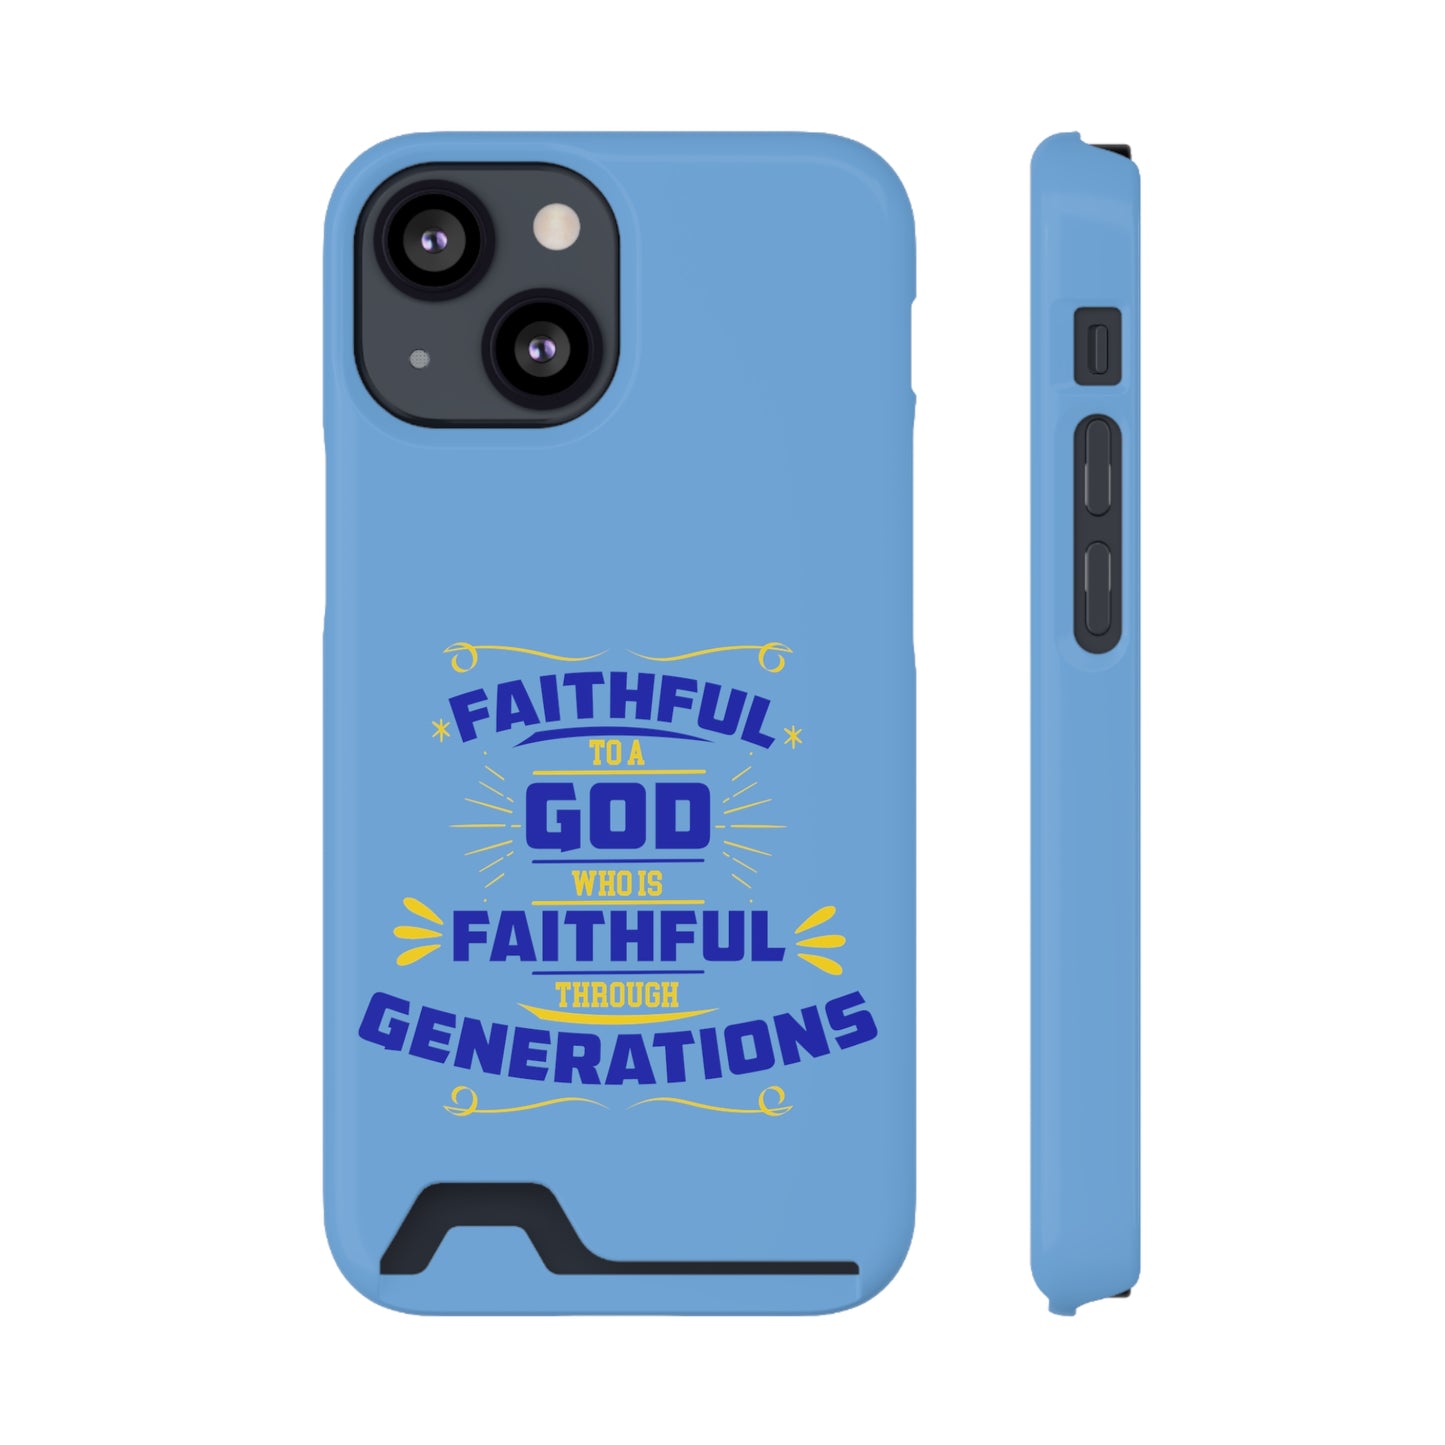 Faithful To A God Who Is Faithful Through Generations Phone Case With Card Holder